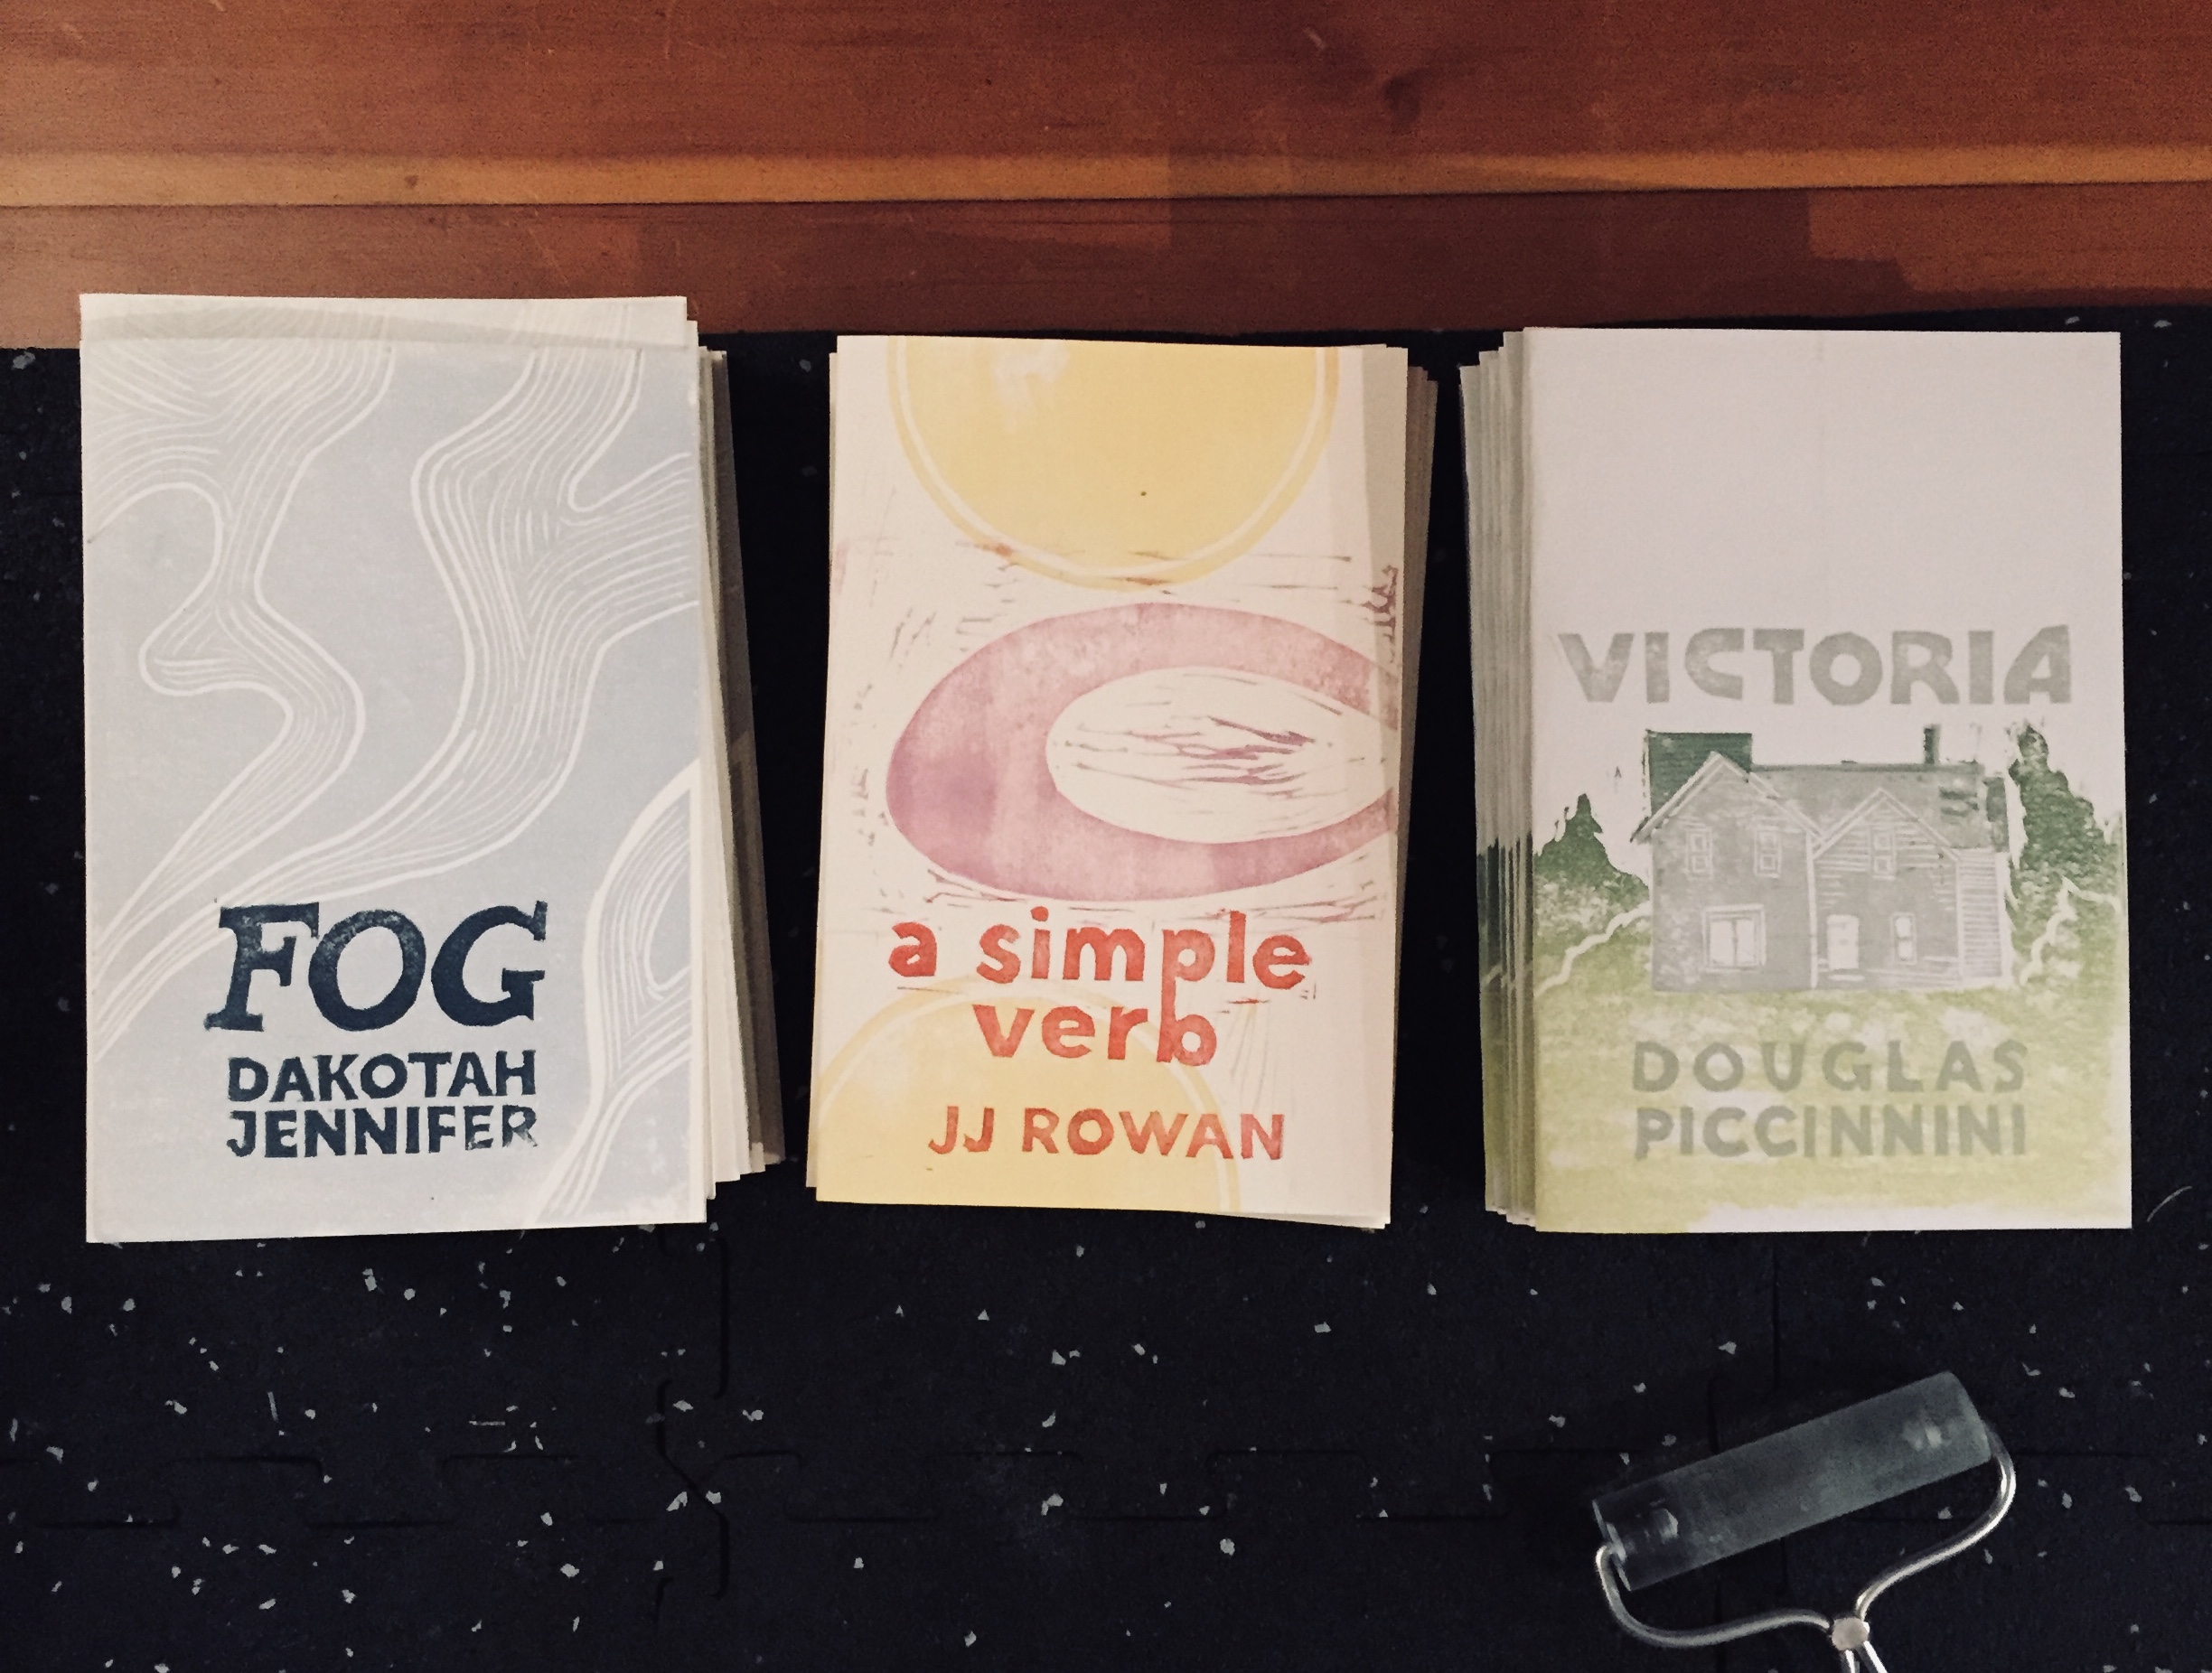 Three chapbooks with linocut covers. From left to right: FOG by Dakotah Jennifer, blue and cream waves with dark blue text; A SIMPLE VERB by JJ Rowan, yellow and lavender geometric shapes with red-orange text; and VICTORIA by Douglas Piccinnini, light green-to-dark green gradient ground with a gray house and gray text.